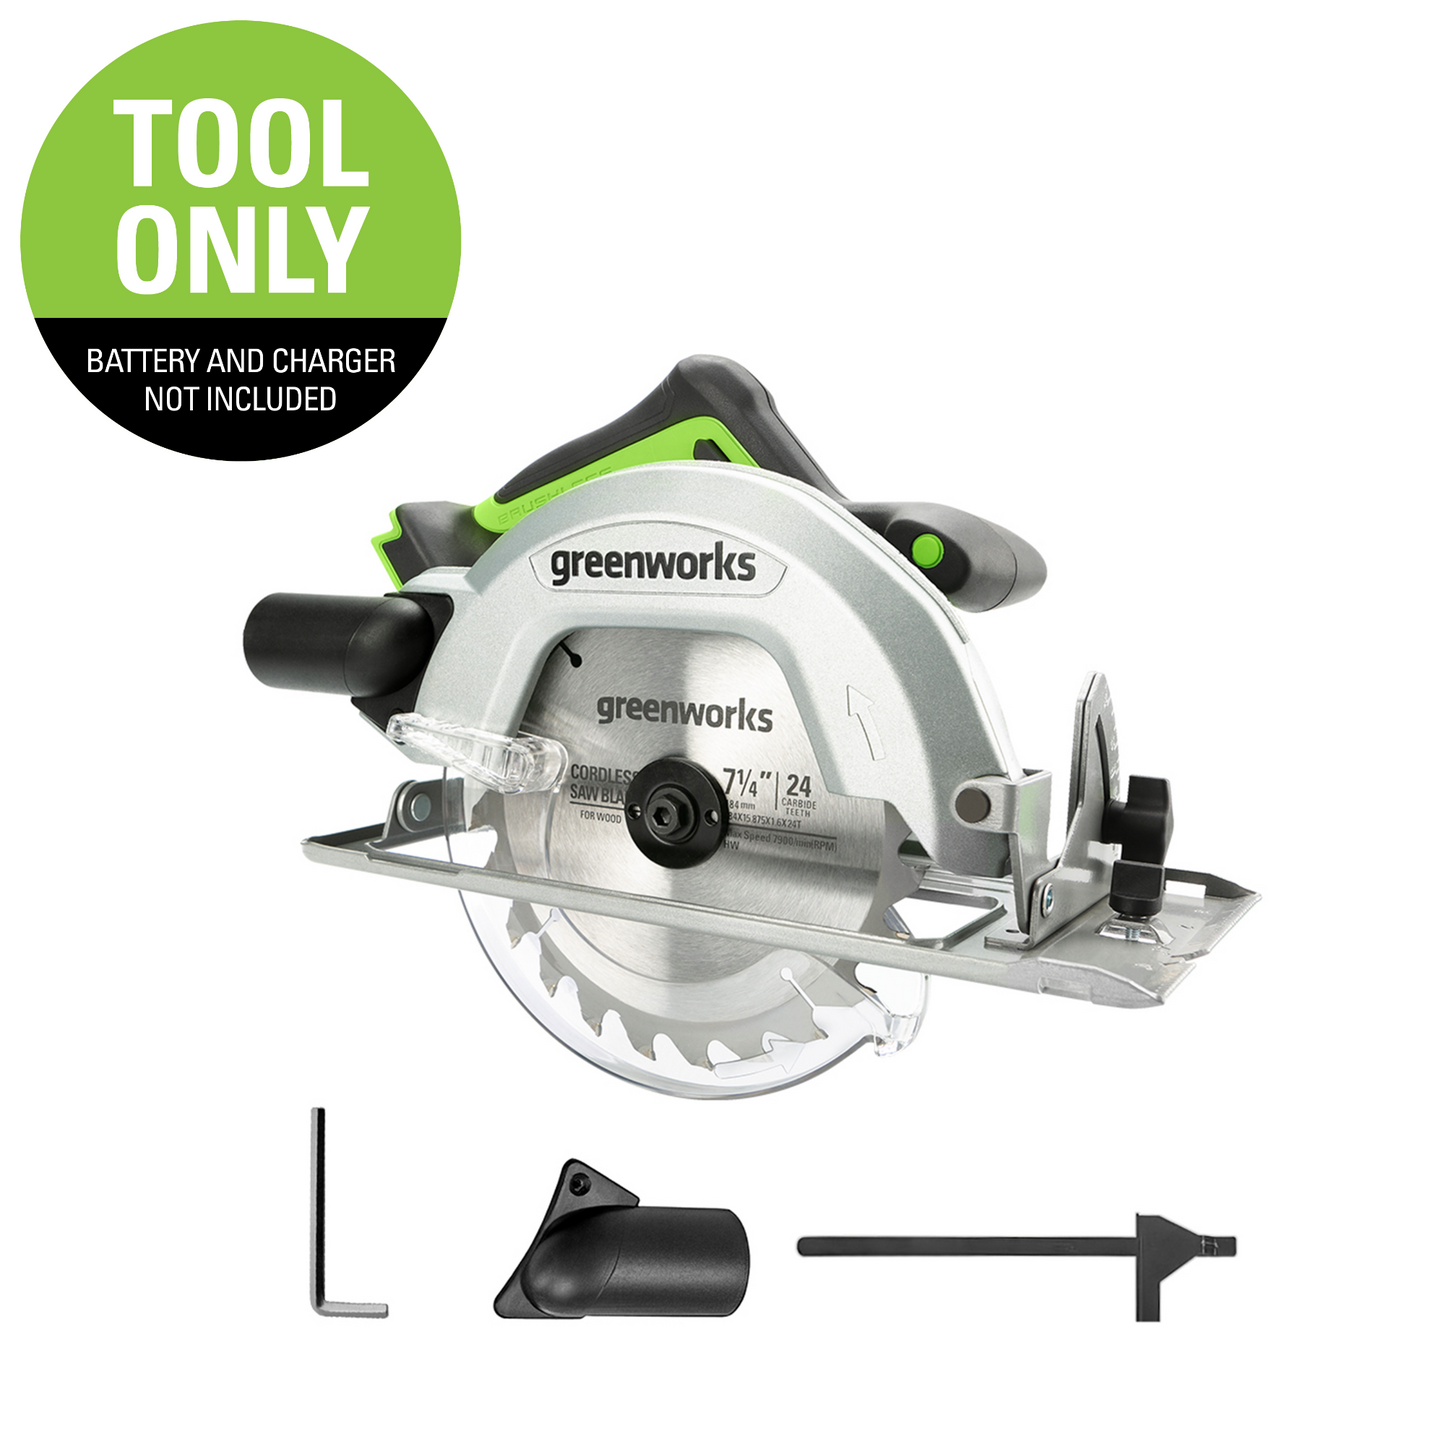 Greenworks 24V 7-1/4-Inch Brushless Circular Saw, Battery Not Included